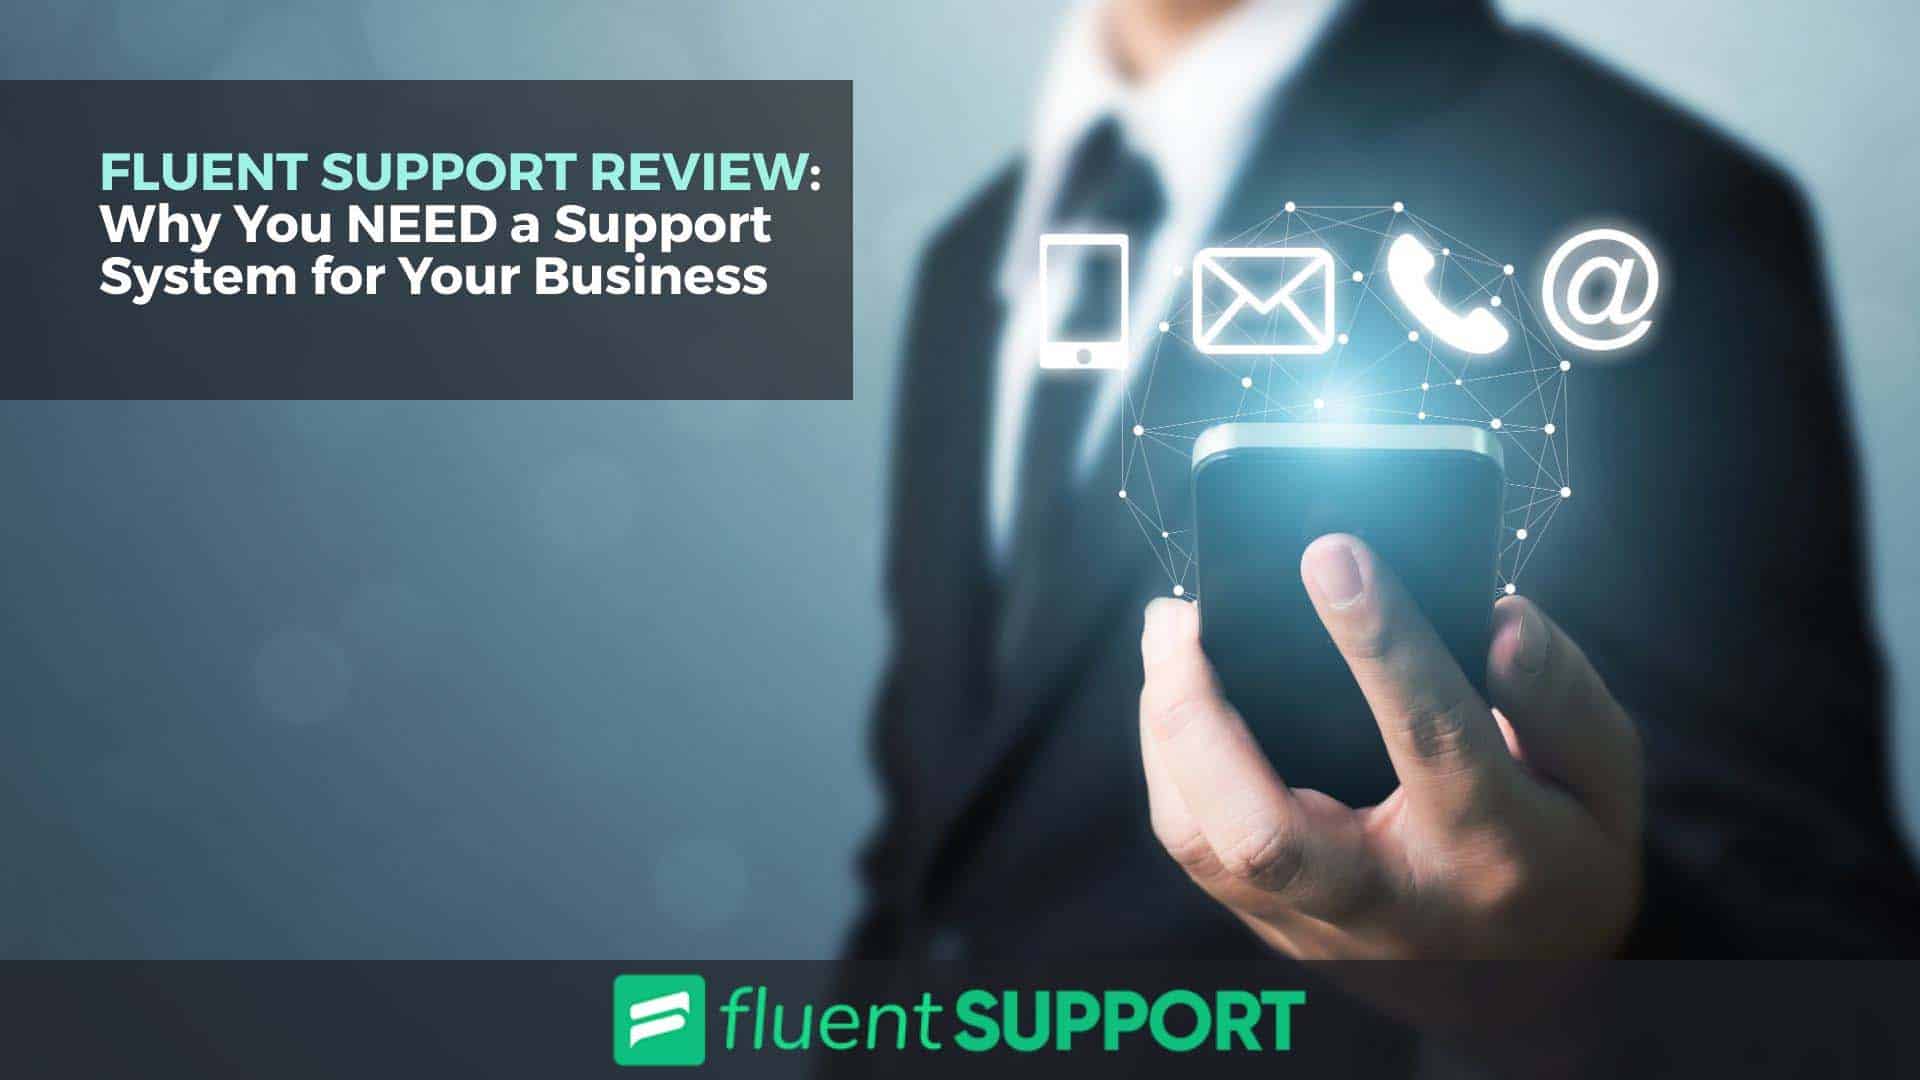 Fluent Support Review: Why You Need a Support System for Your Business